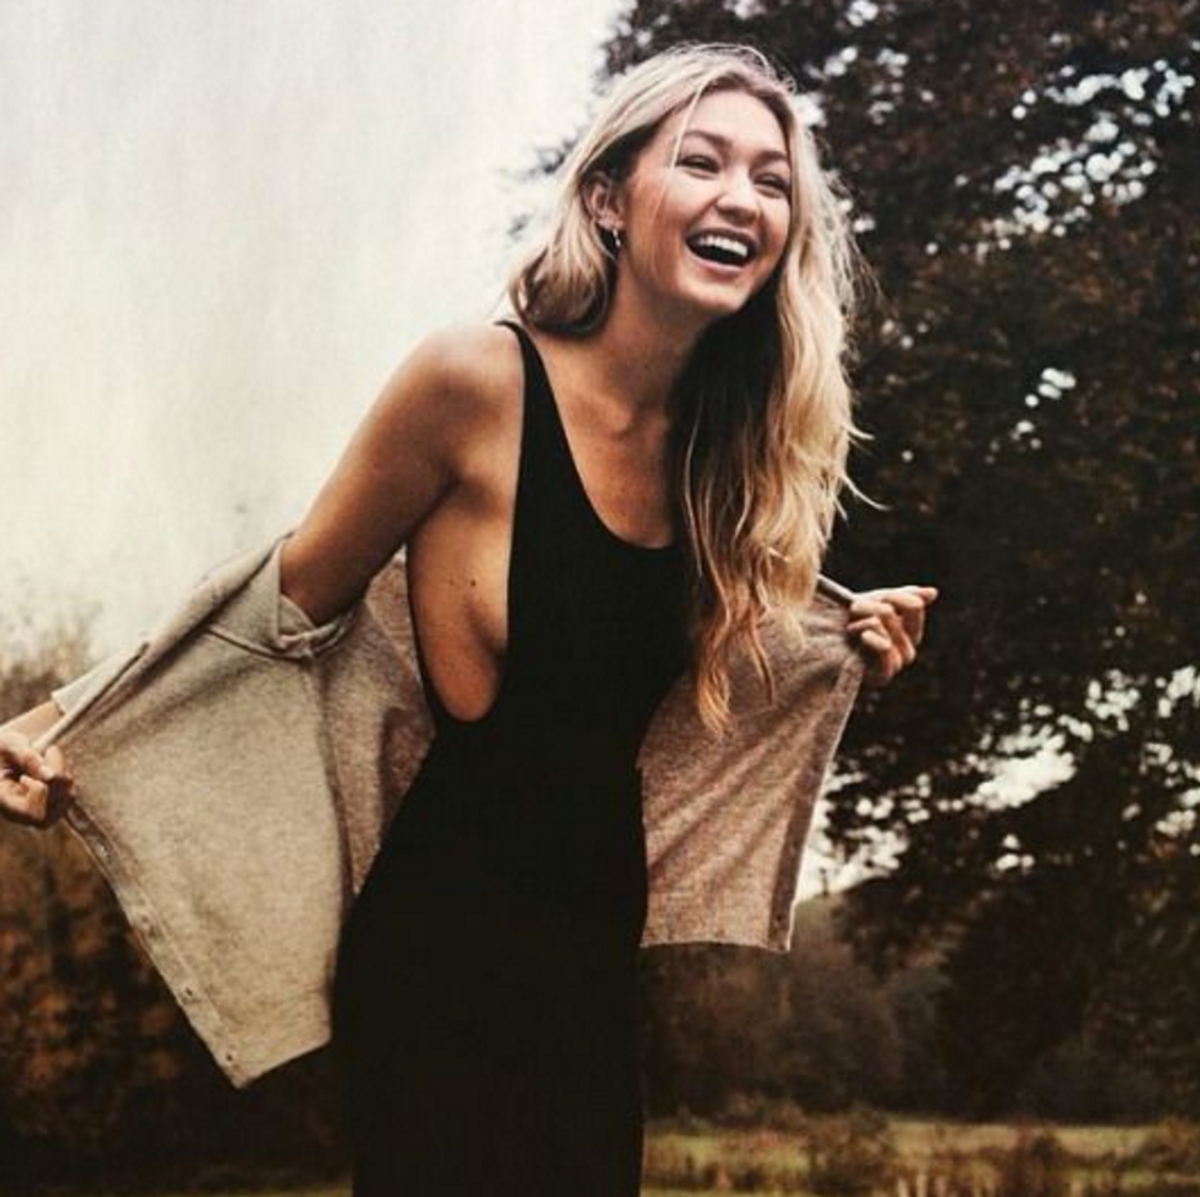 4 Reasons We're Obsessed With The Model Of The Moment: Gigi Hadid